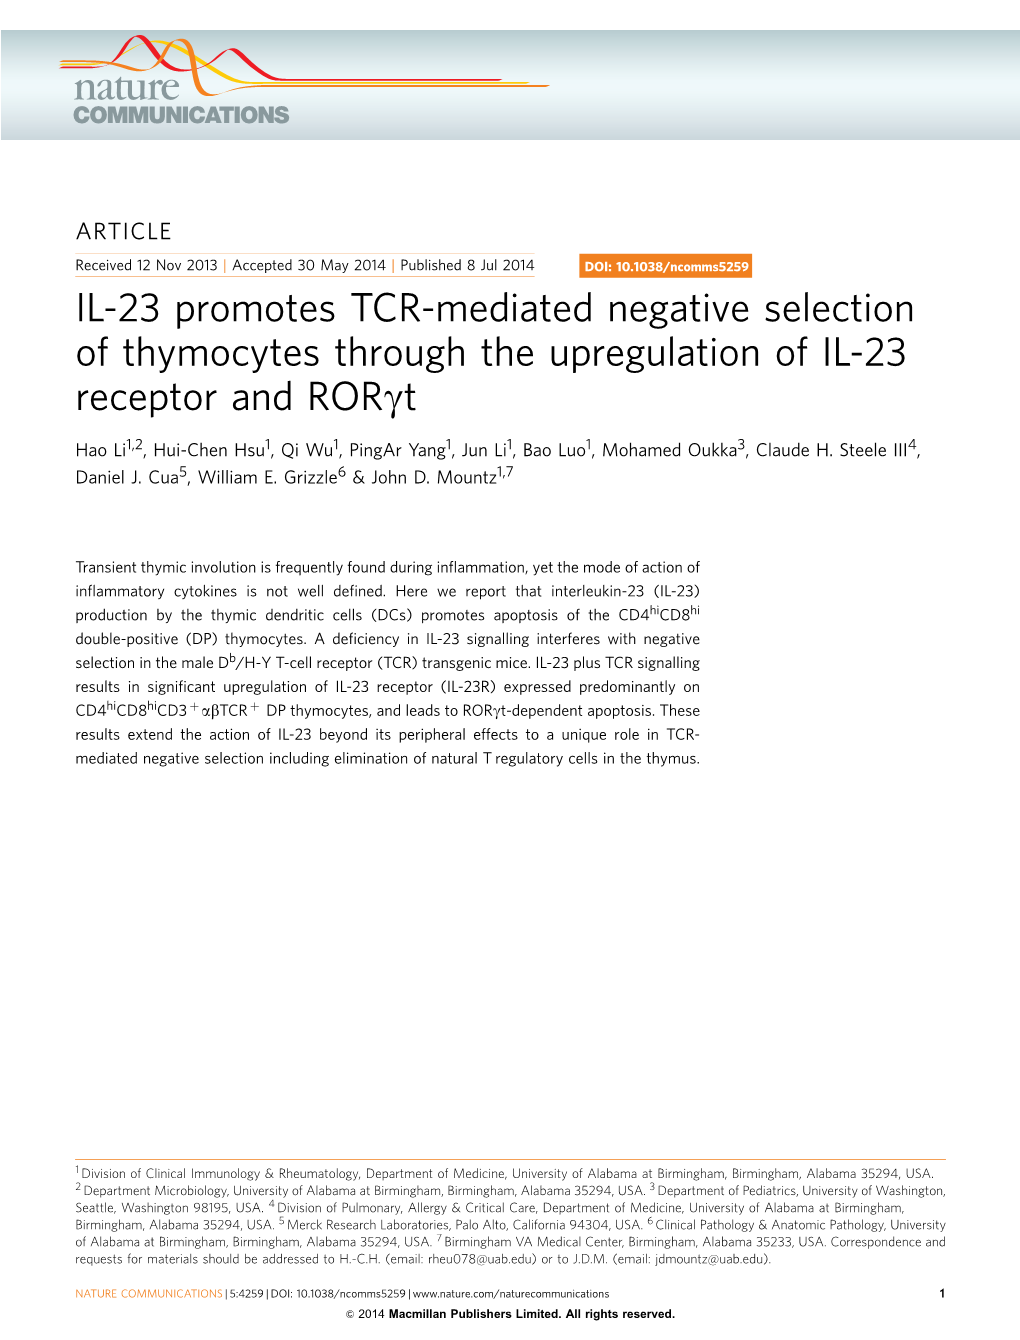 IL-23 Promotes TCR-Mediated Negative Selection of Thymocytes Through the Upregulation of IL-23 Receptor and Rorgt